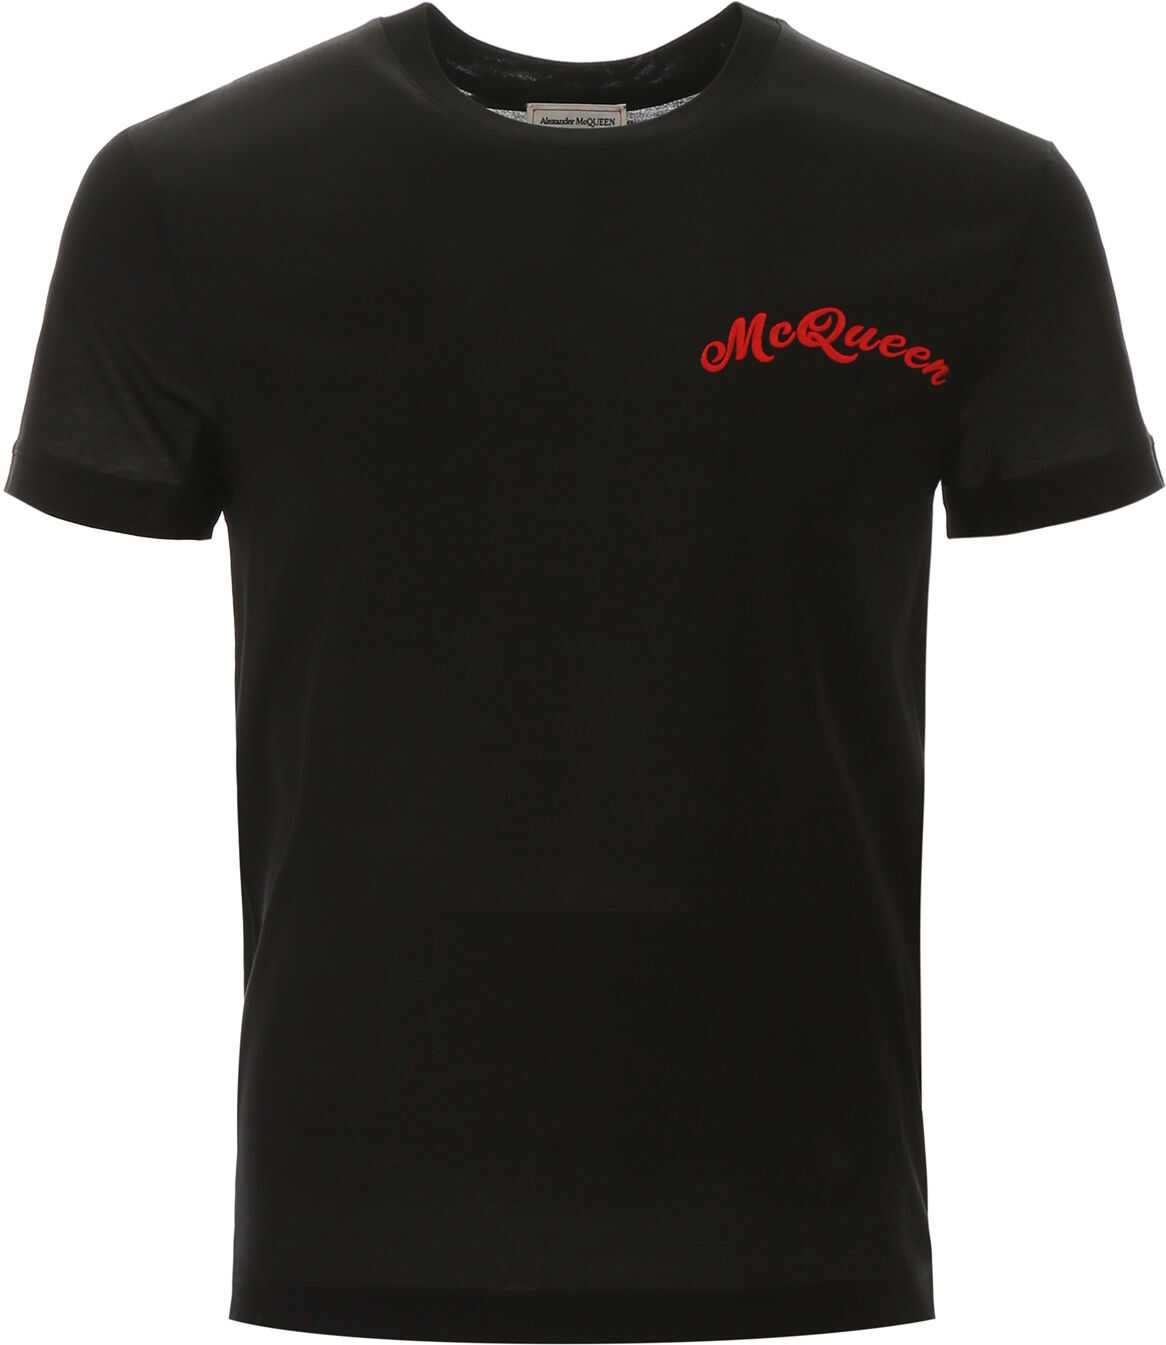 Alexander McQueen T-Shirt With Embroidered Logo BLACK